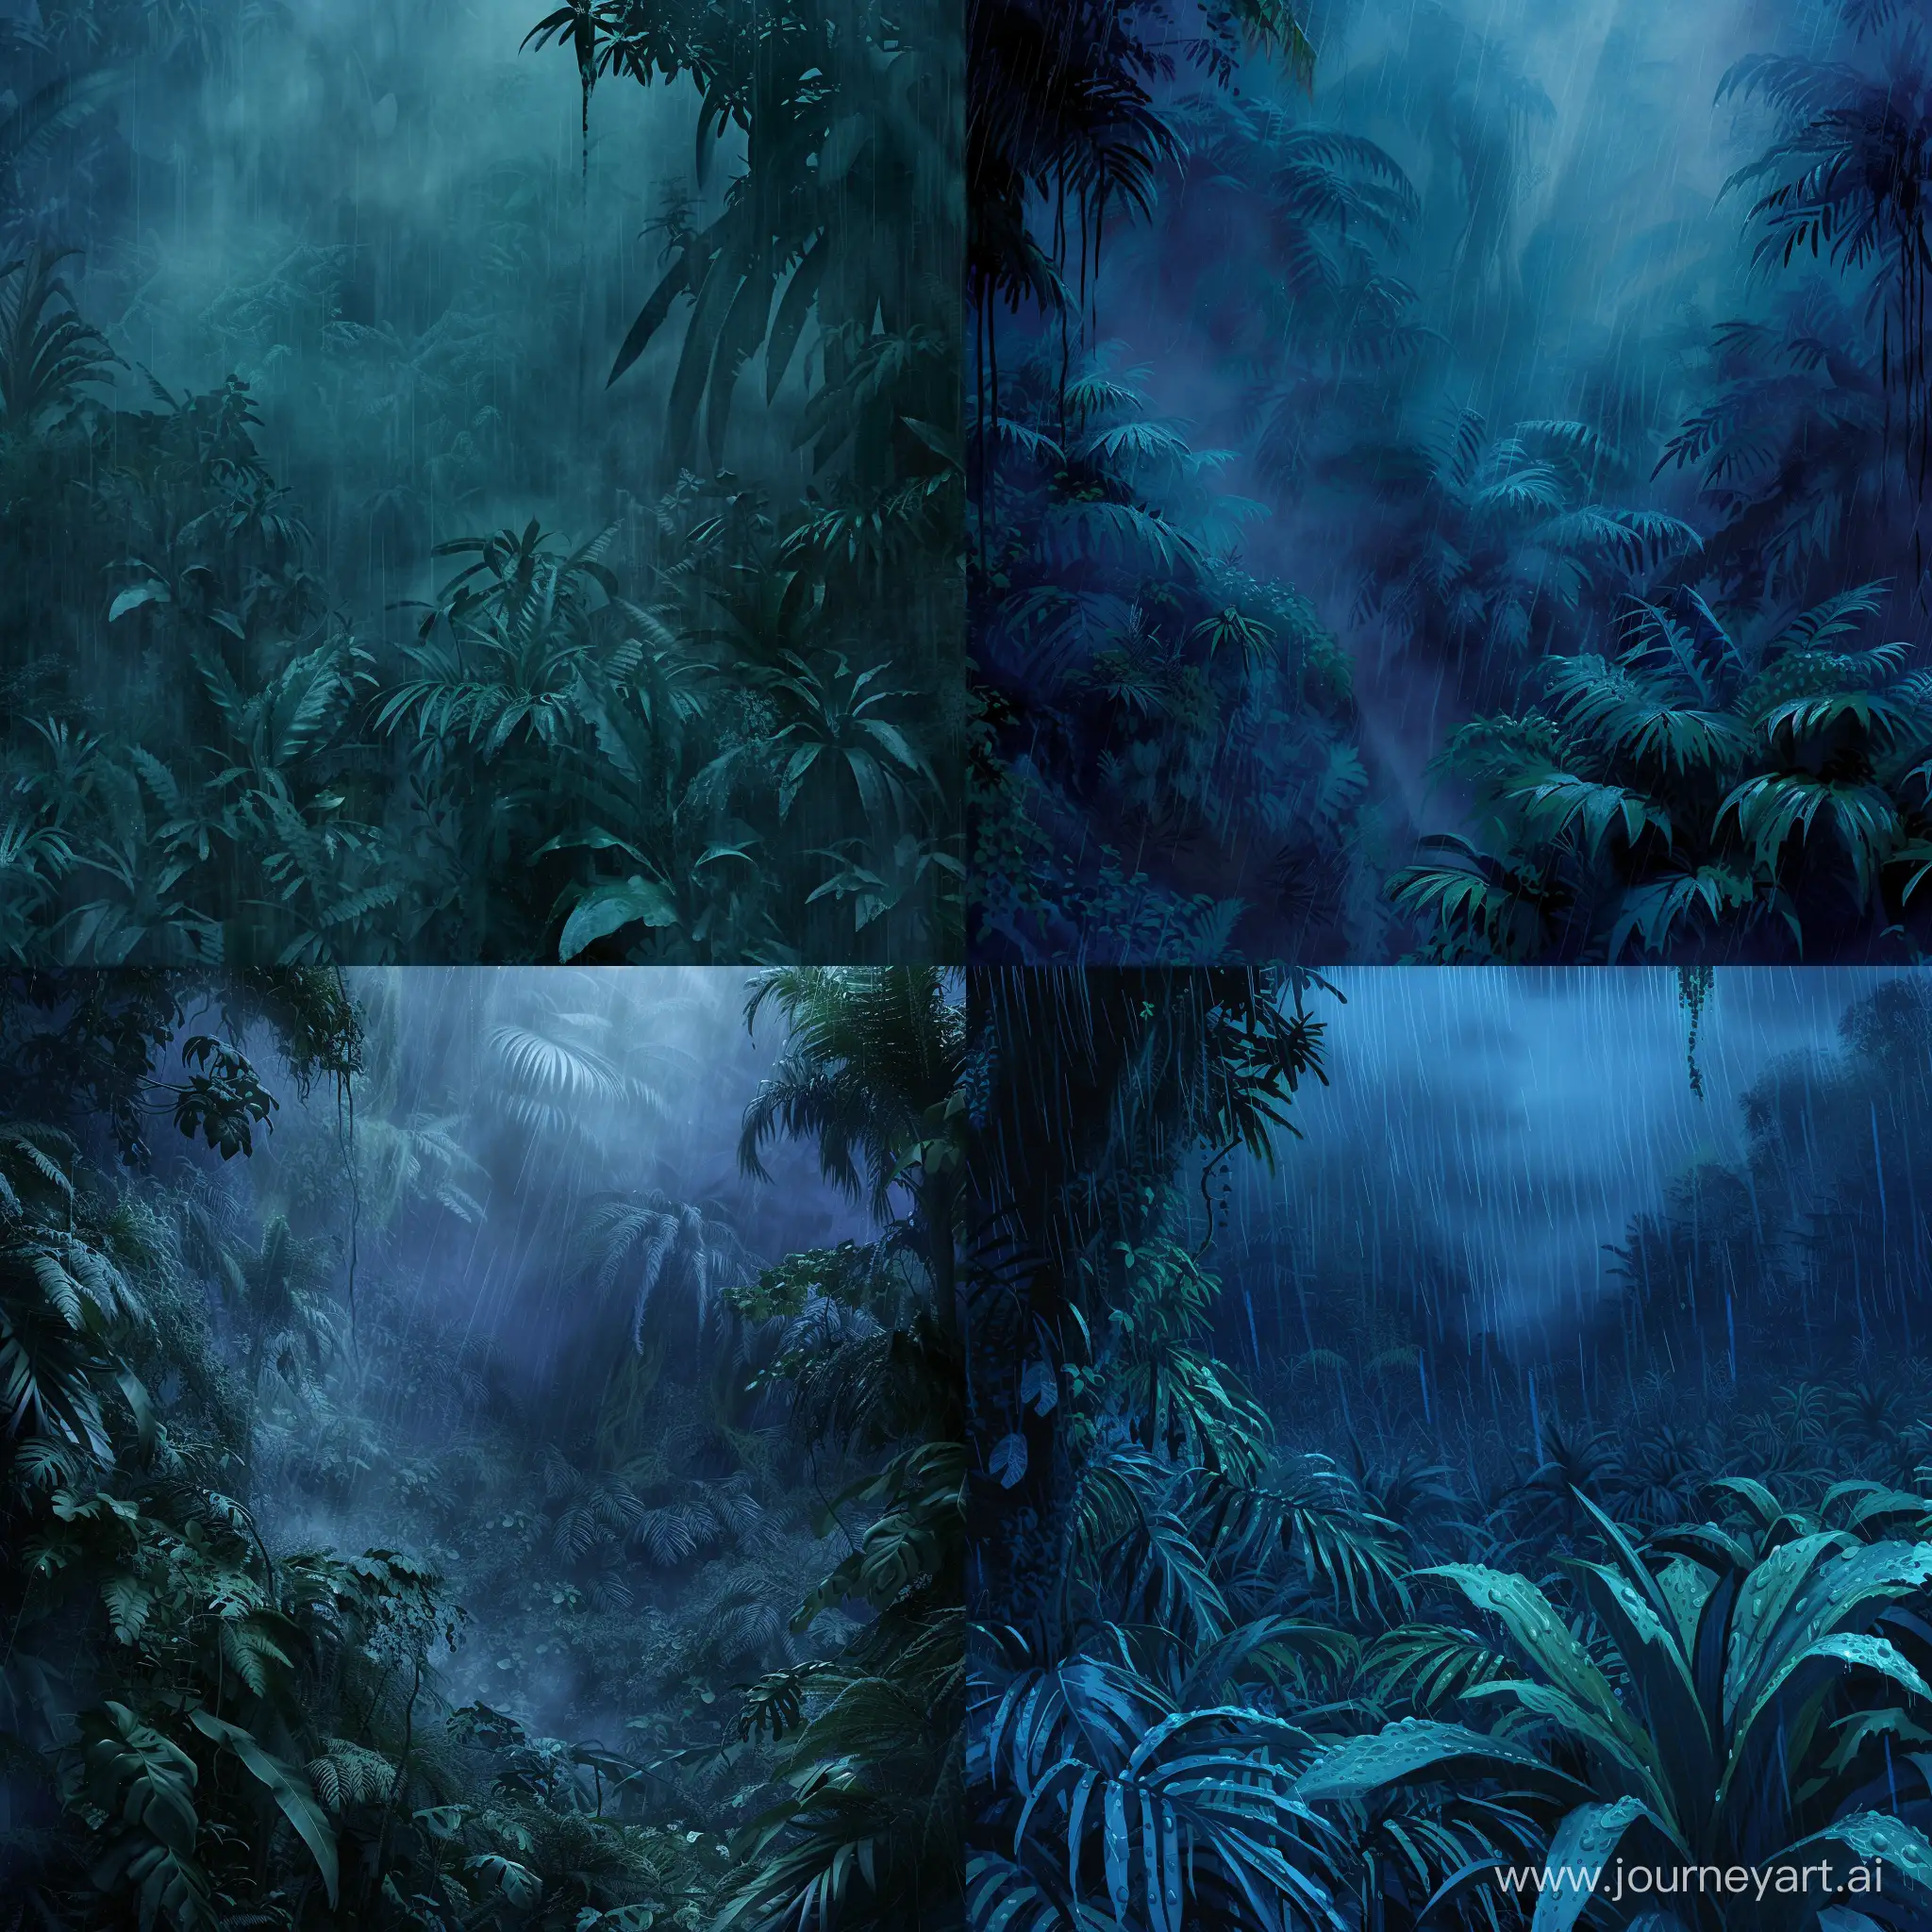 An unusual sci fi dark fantasy alien landscape. Jungles. There is a heavy tropical downpour. The plants are deep bluish-green in color.